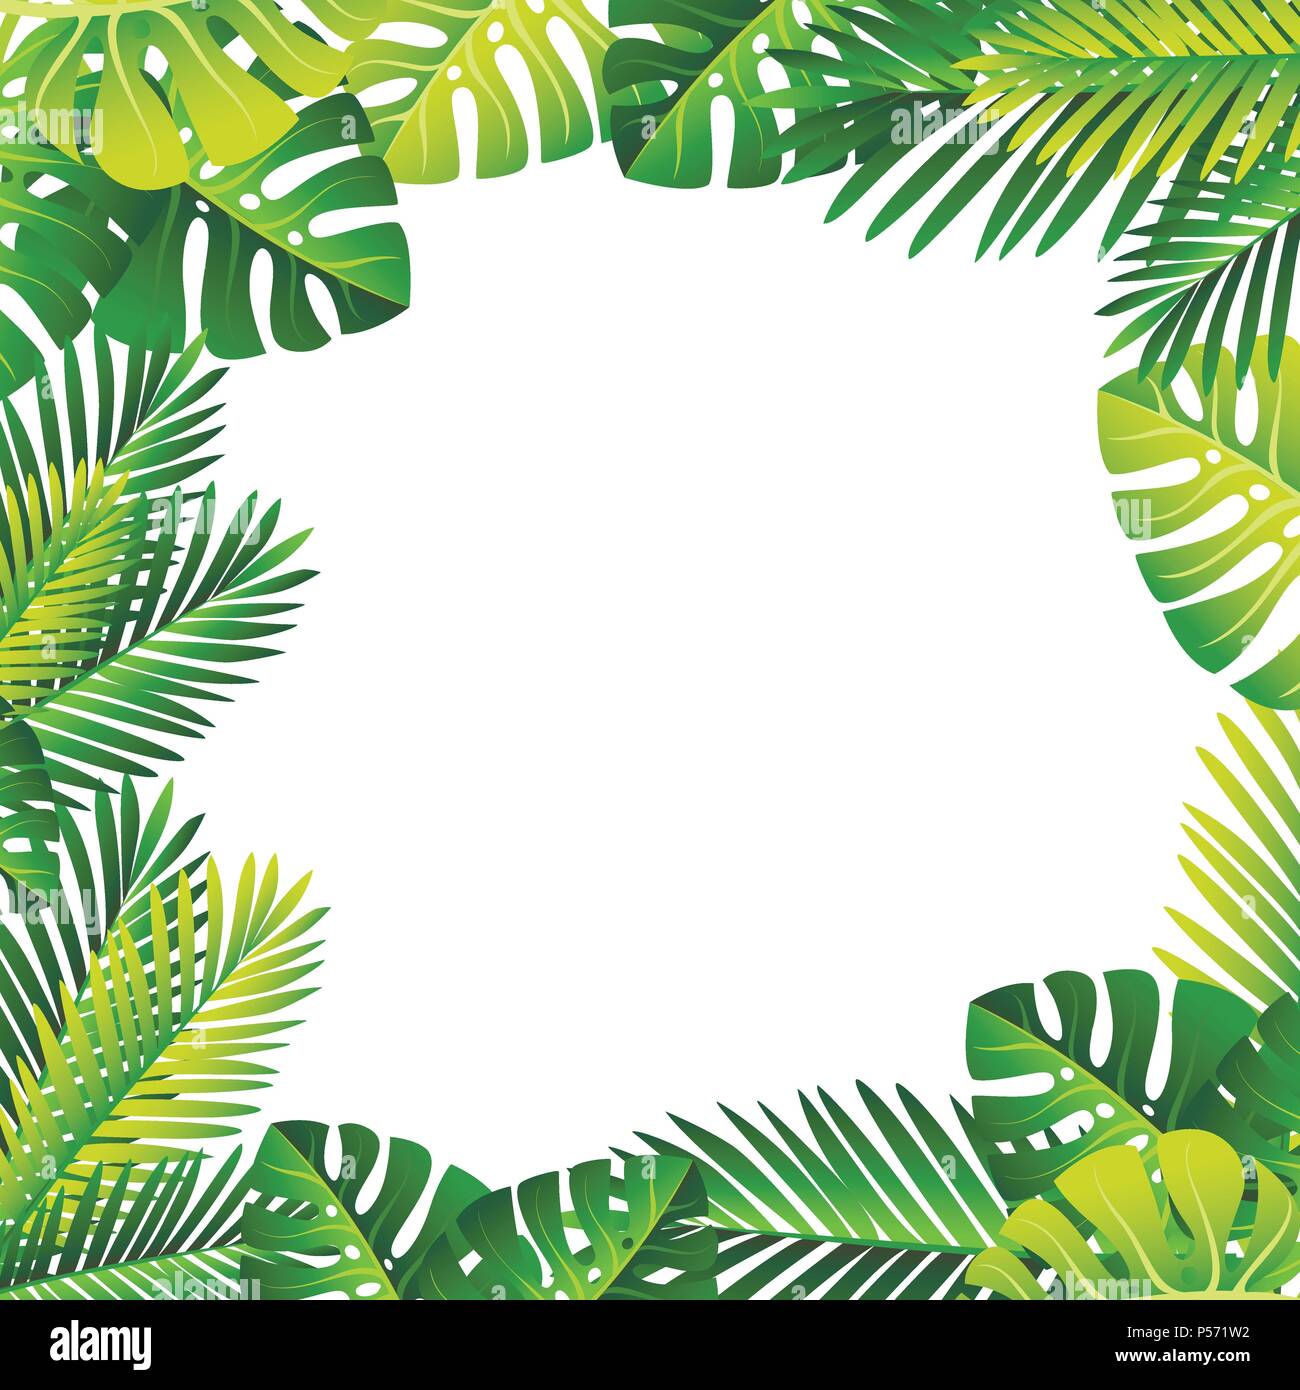 Floral pattern. Tropical green leaves. Exotical jungle and palm leaf ...